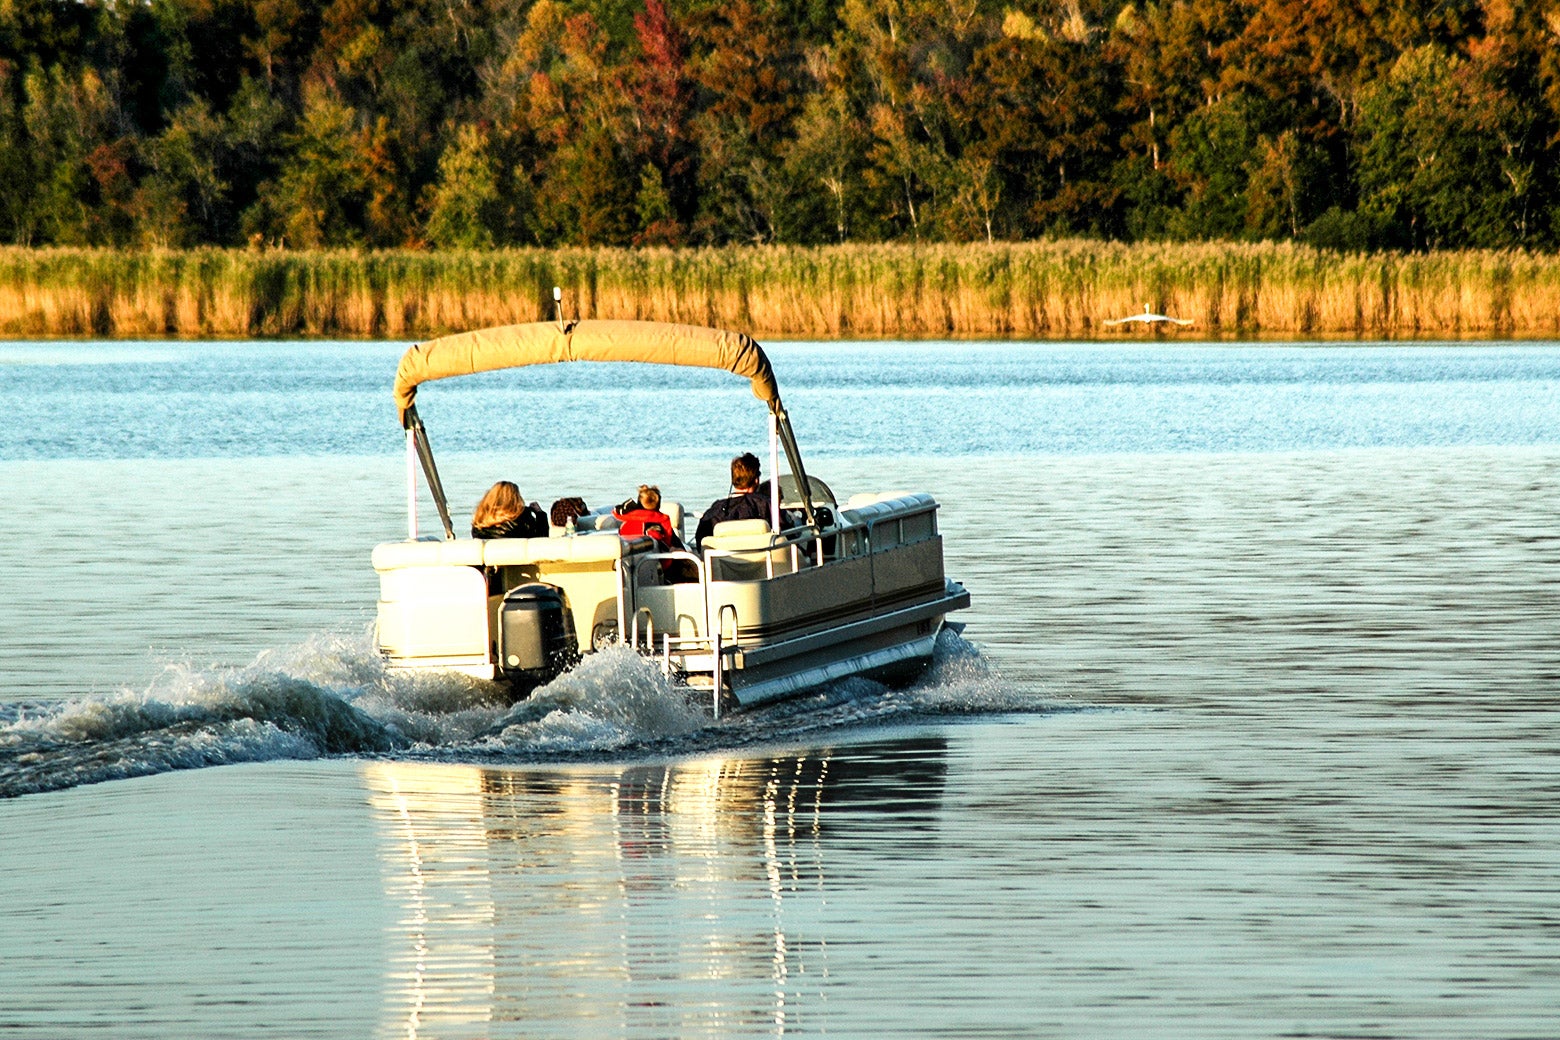 A pontoon boat with a handful of passengers travels in a lake, with trees in autumnal colors in the background.